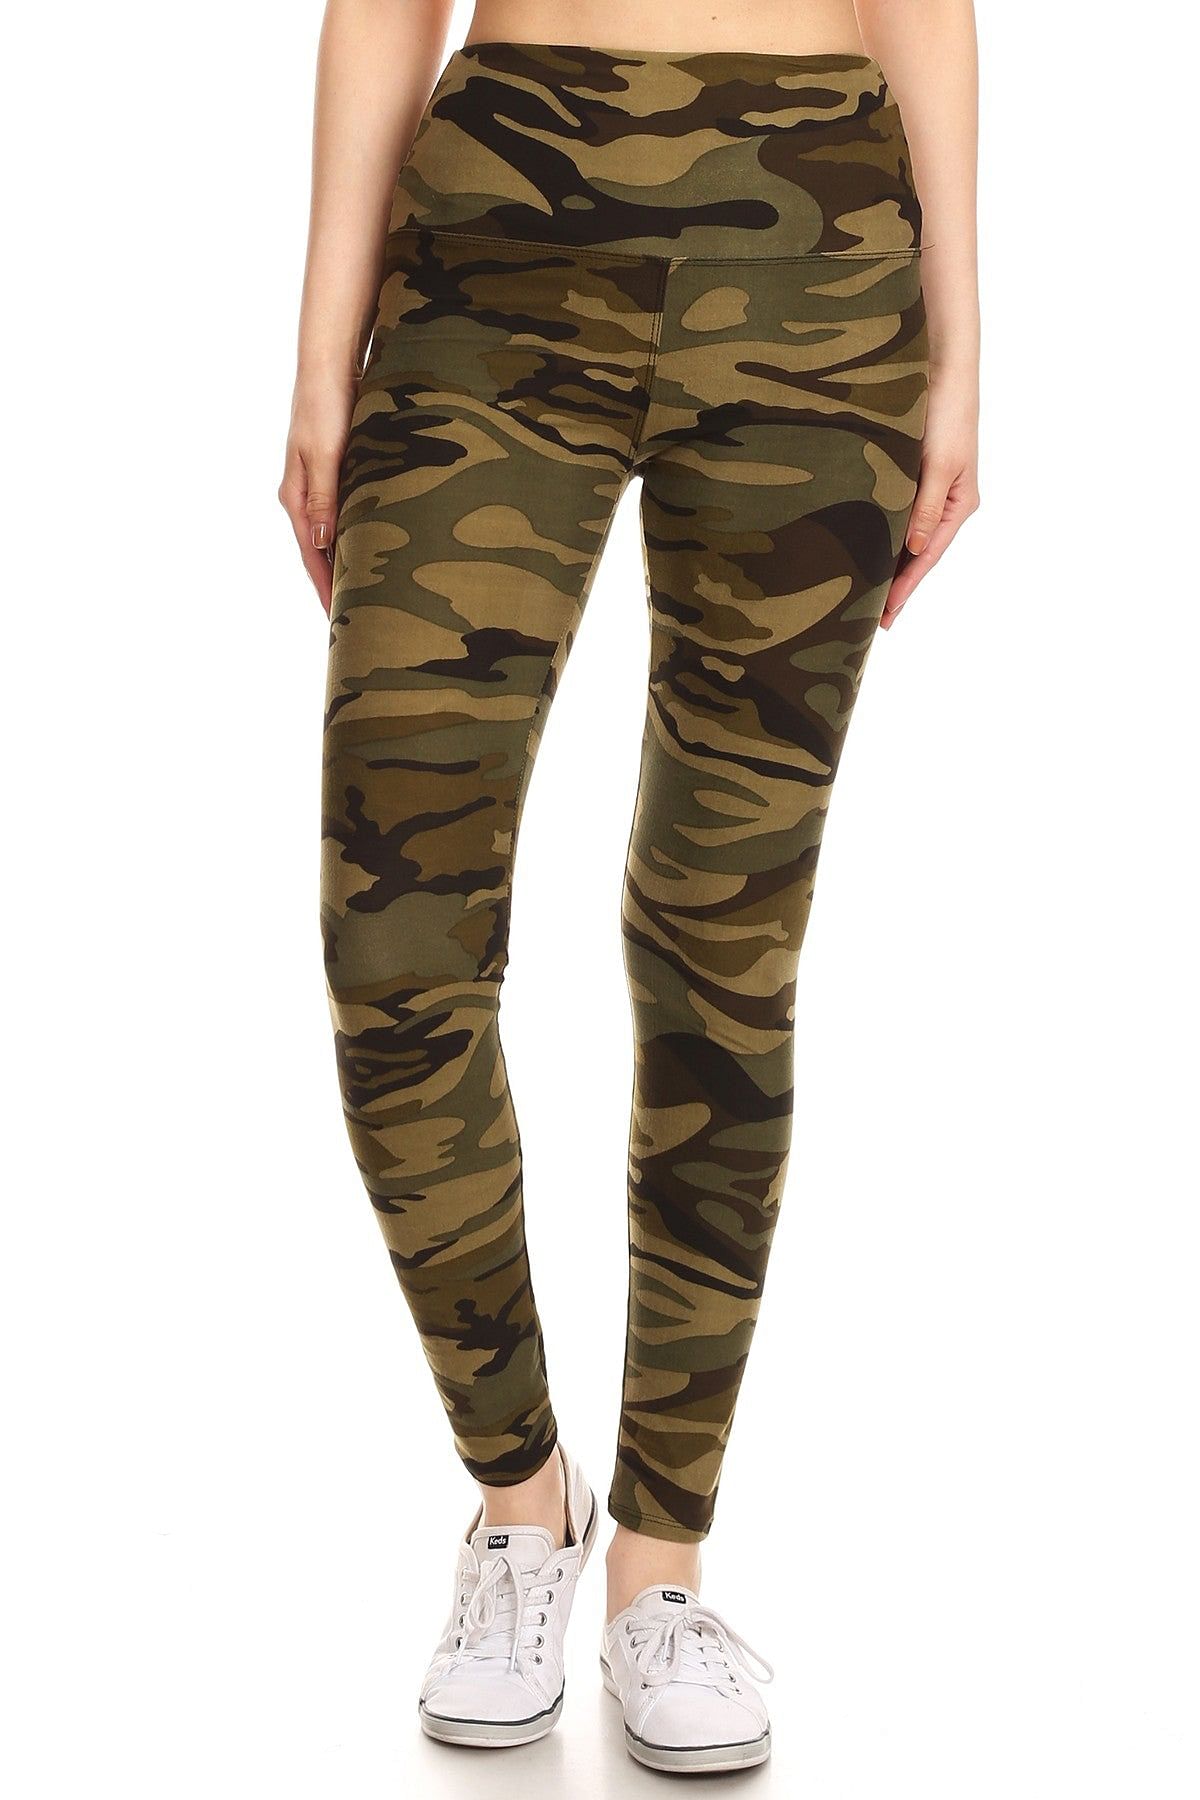 Leggings With Pockets - Green/Camo